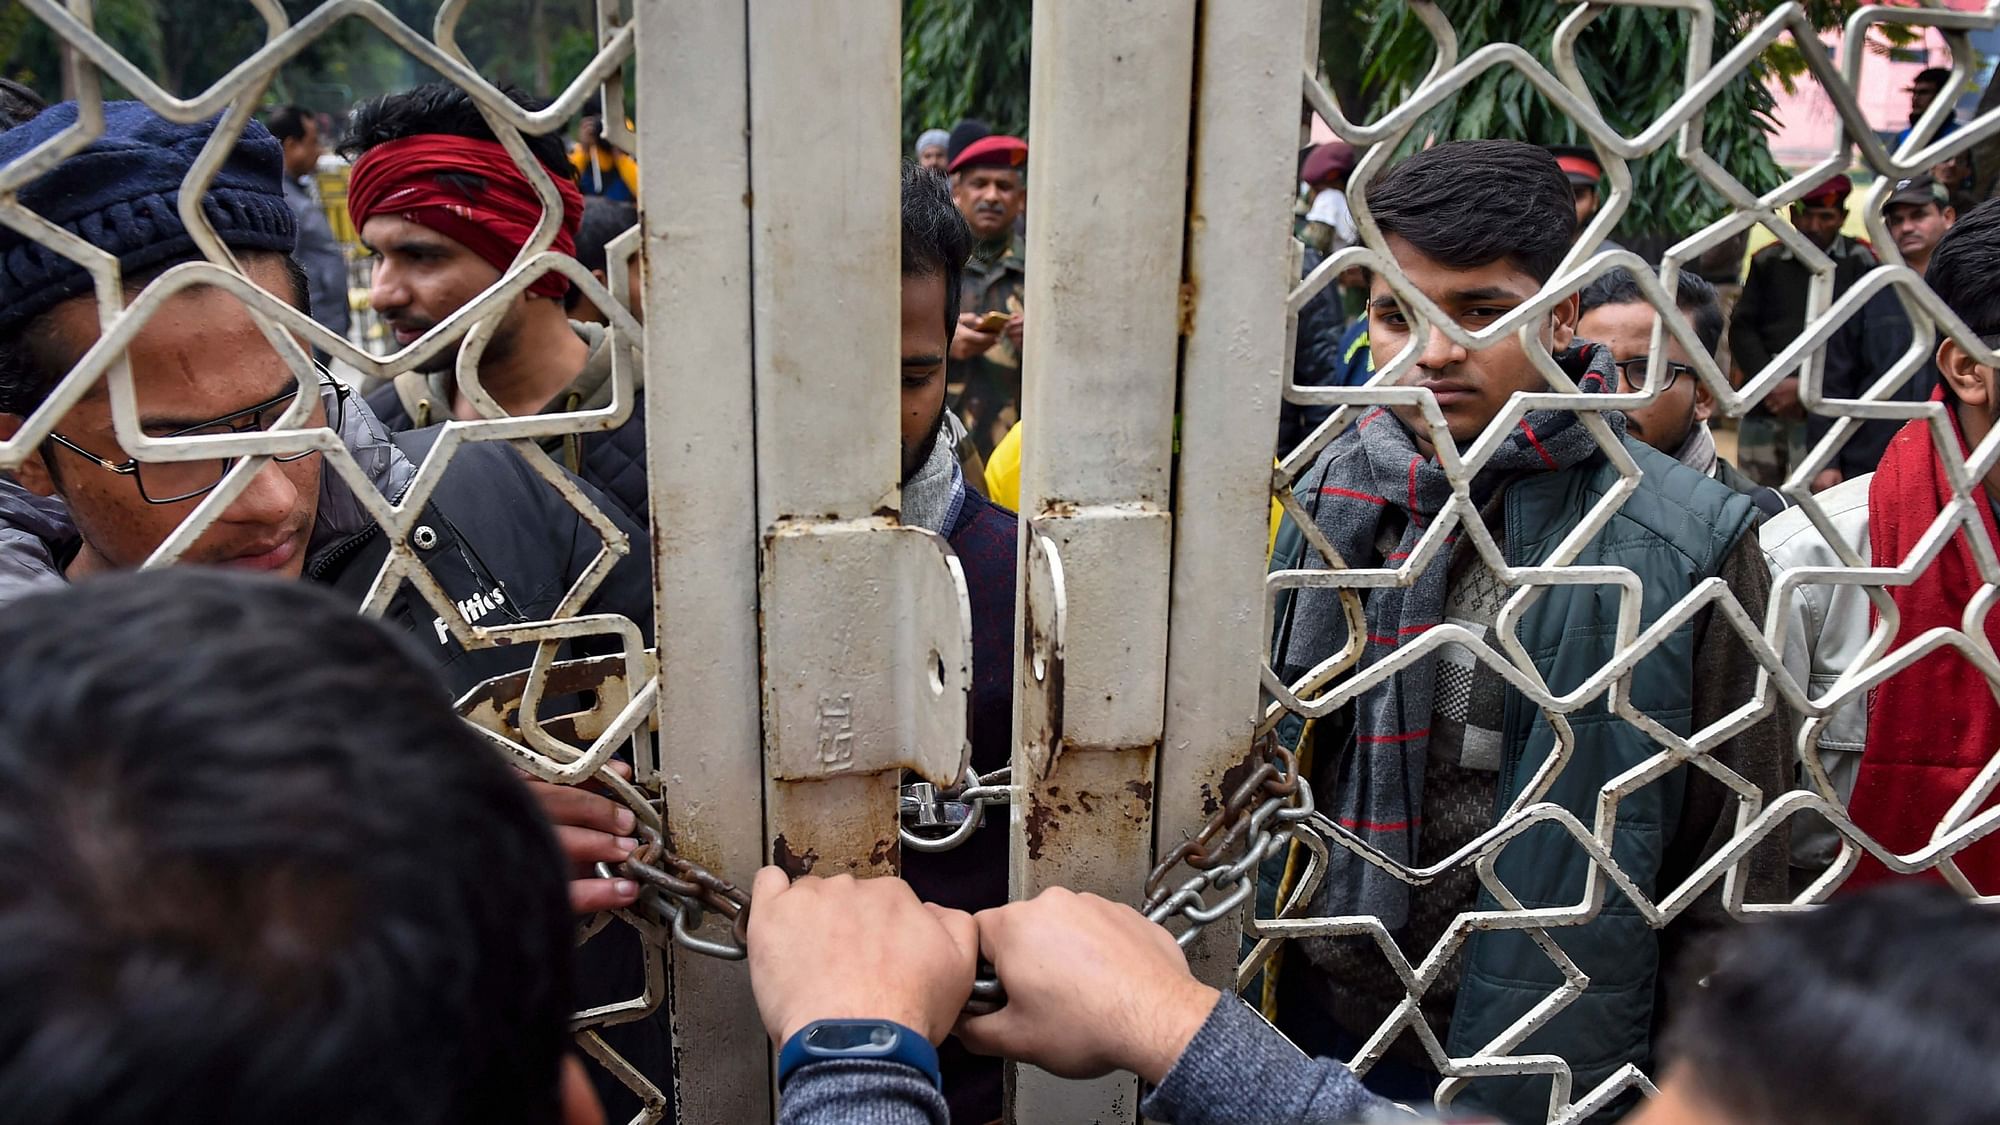 Jamia students try to break a lock to enter the vice chancellor’s office, demanding an FIR against the Delhi police’s use of force against students on 15 December 2019.